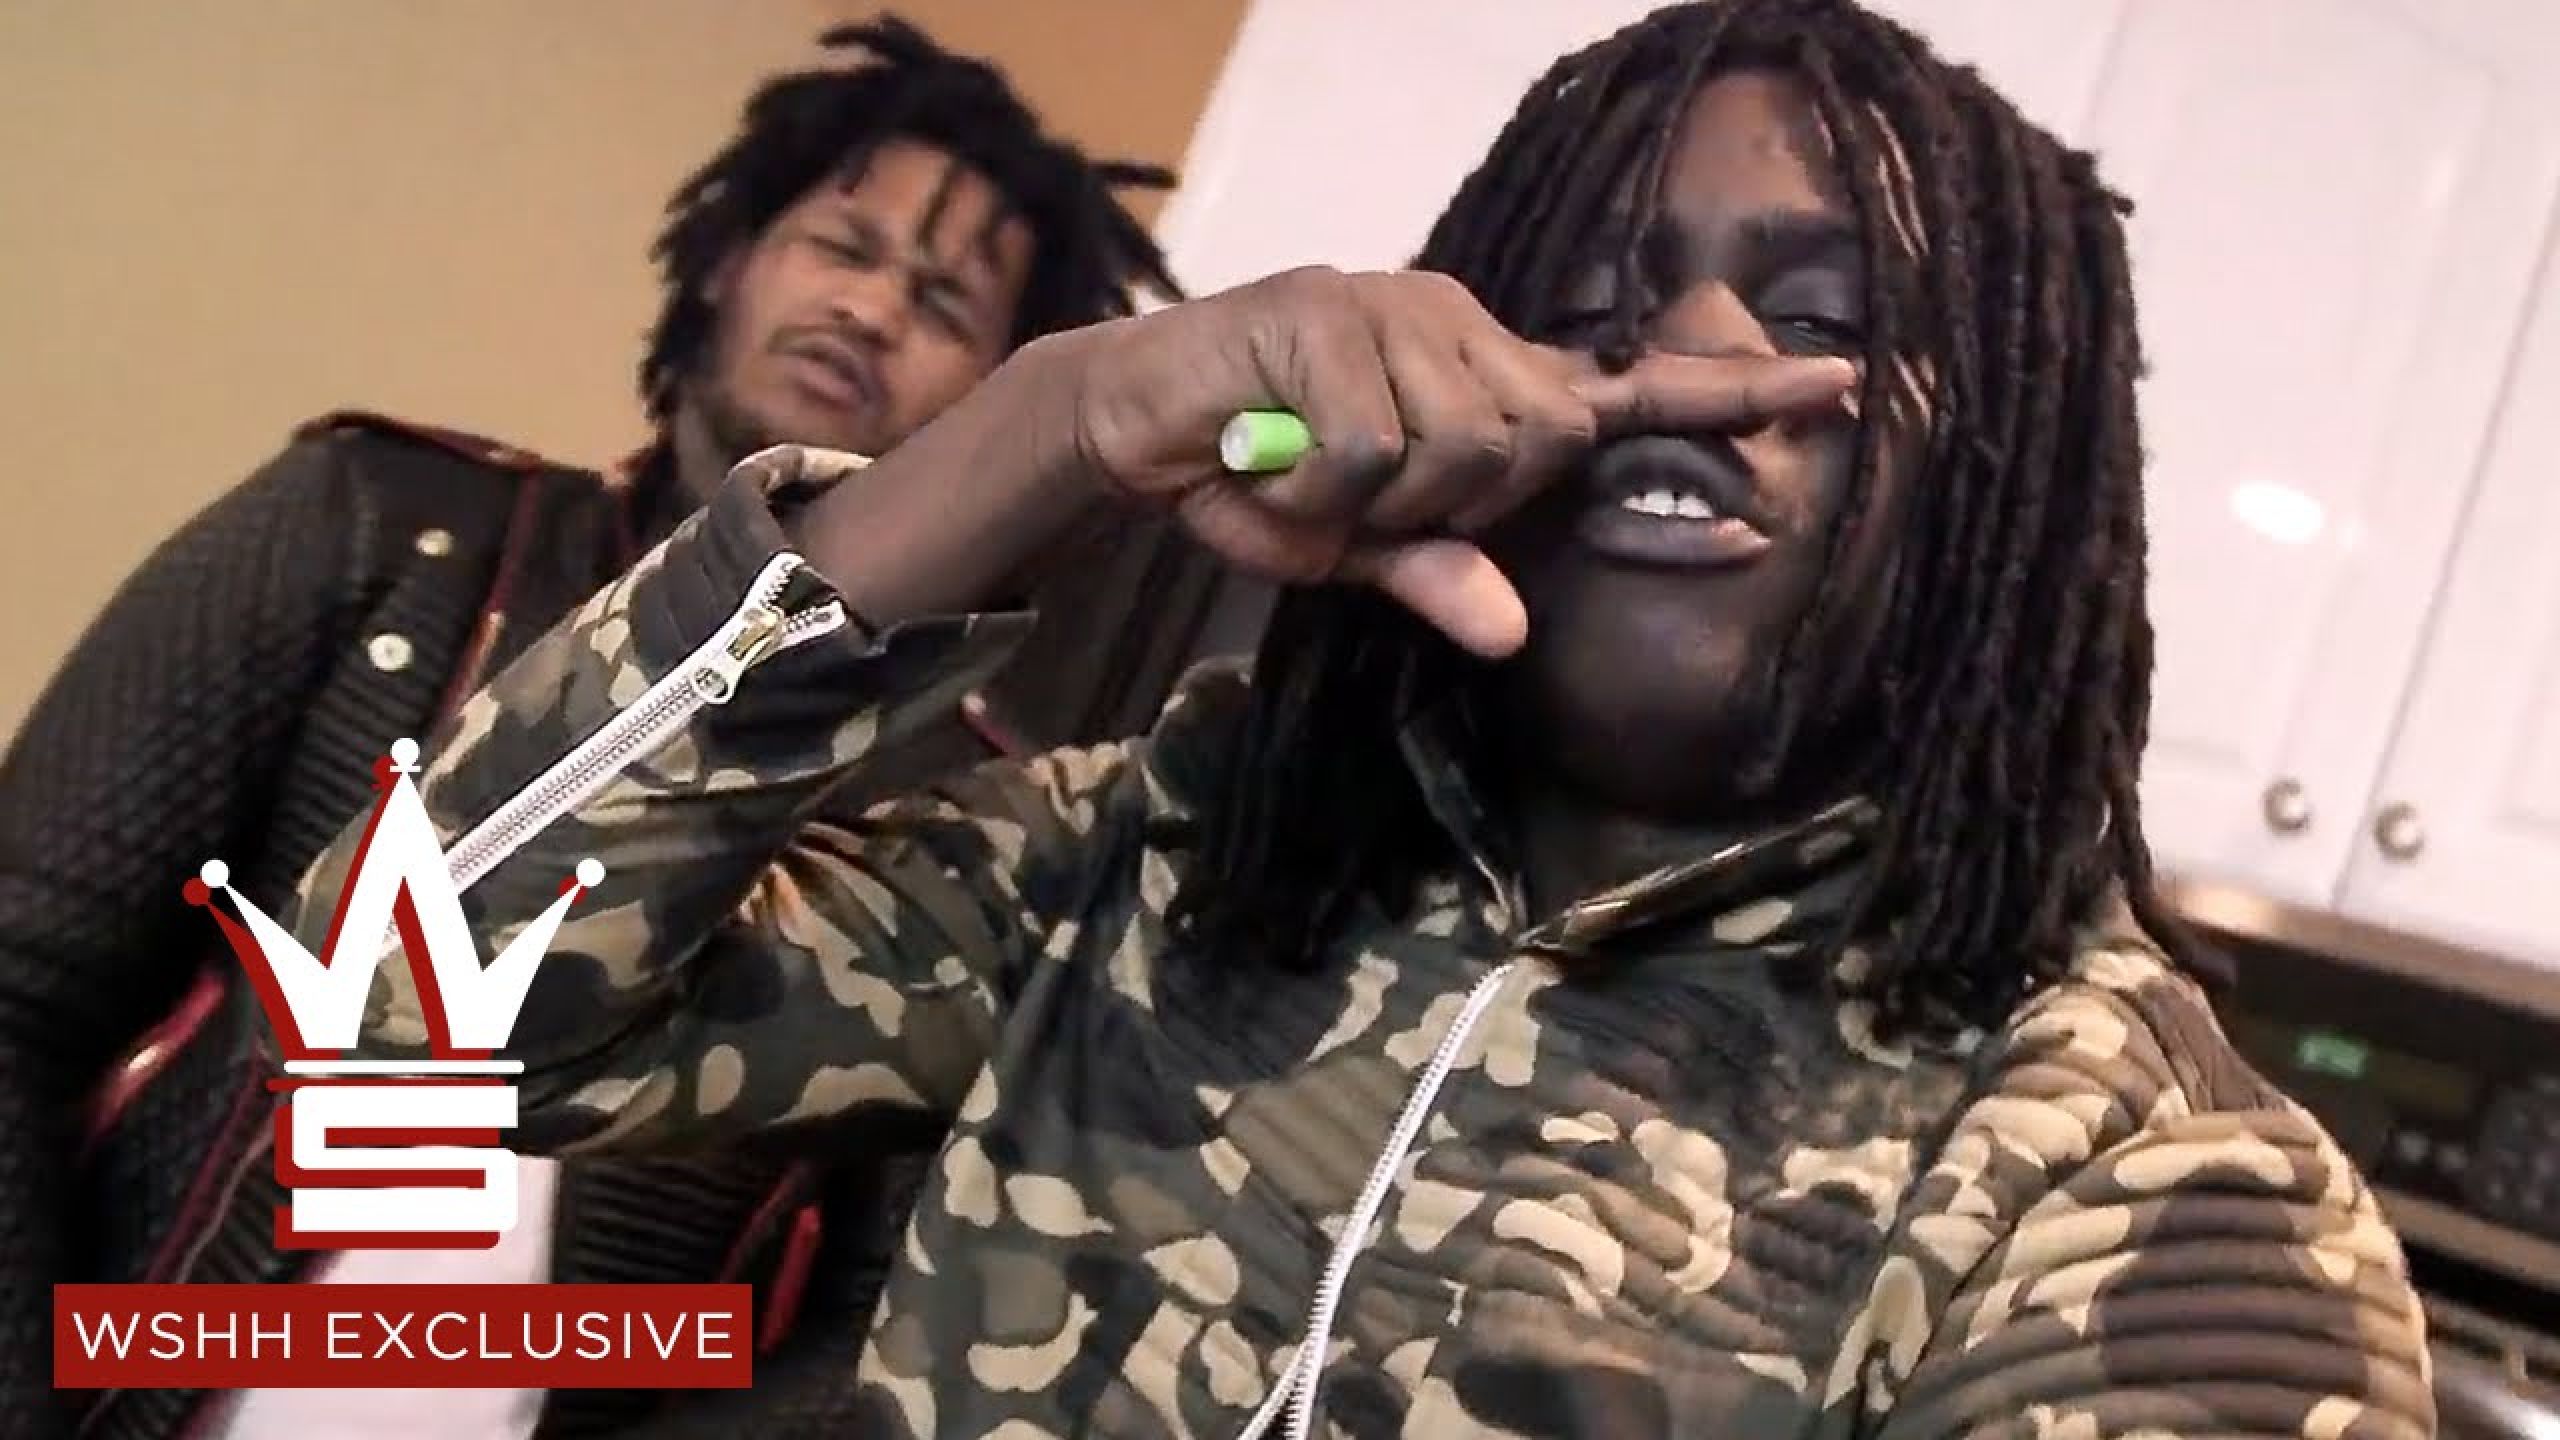 Fredo Santana Chief Keef Dope Game Wshh Exclusive Official Music Video Clothes Outfits